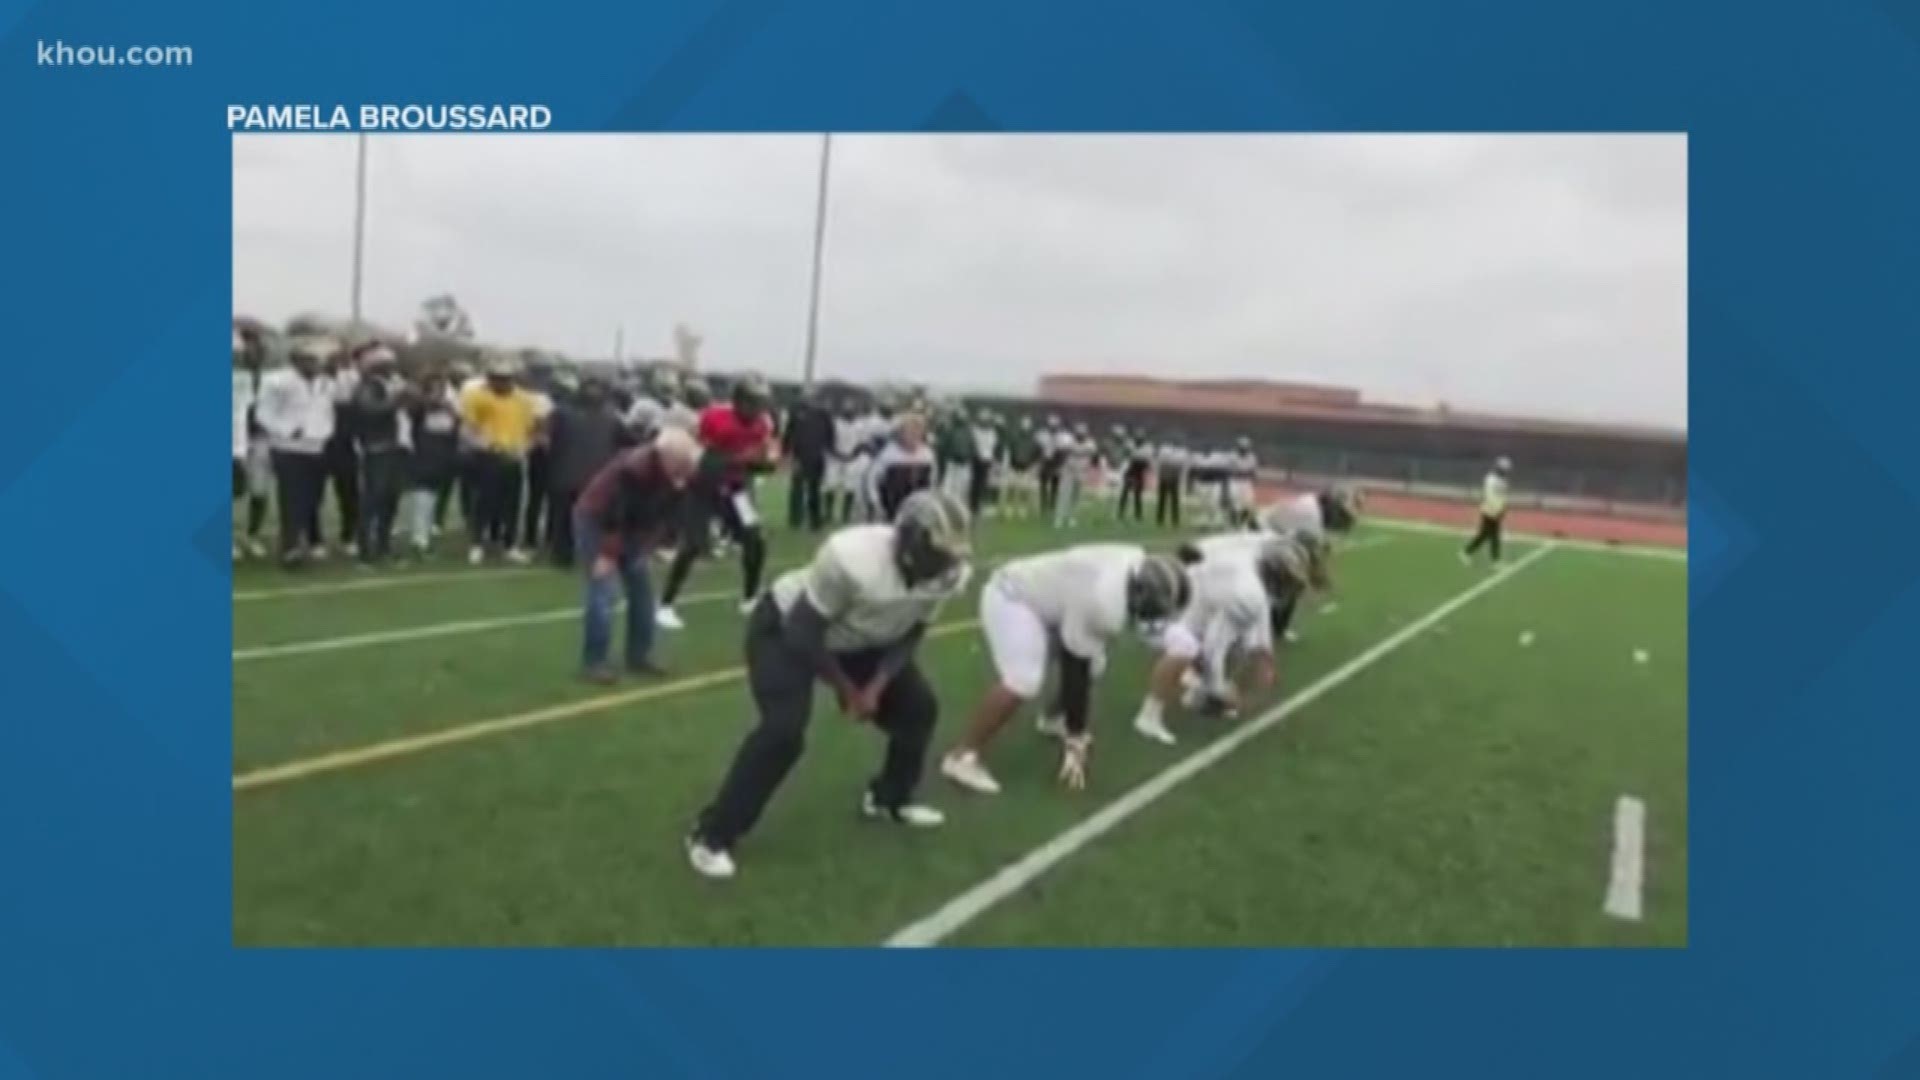 A Cypress grandma who always wanted to score a touchdown got ot do so with help from the Cy Falls football team.